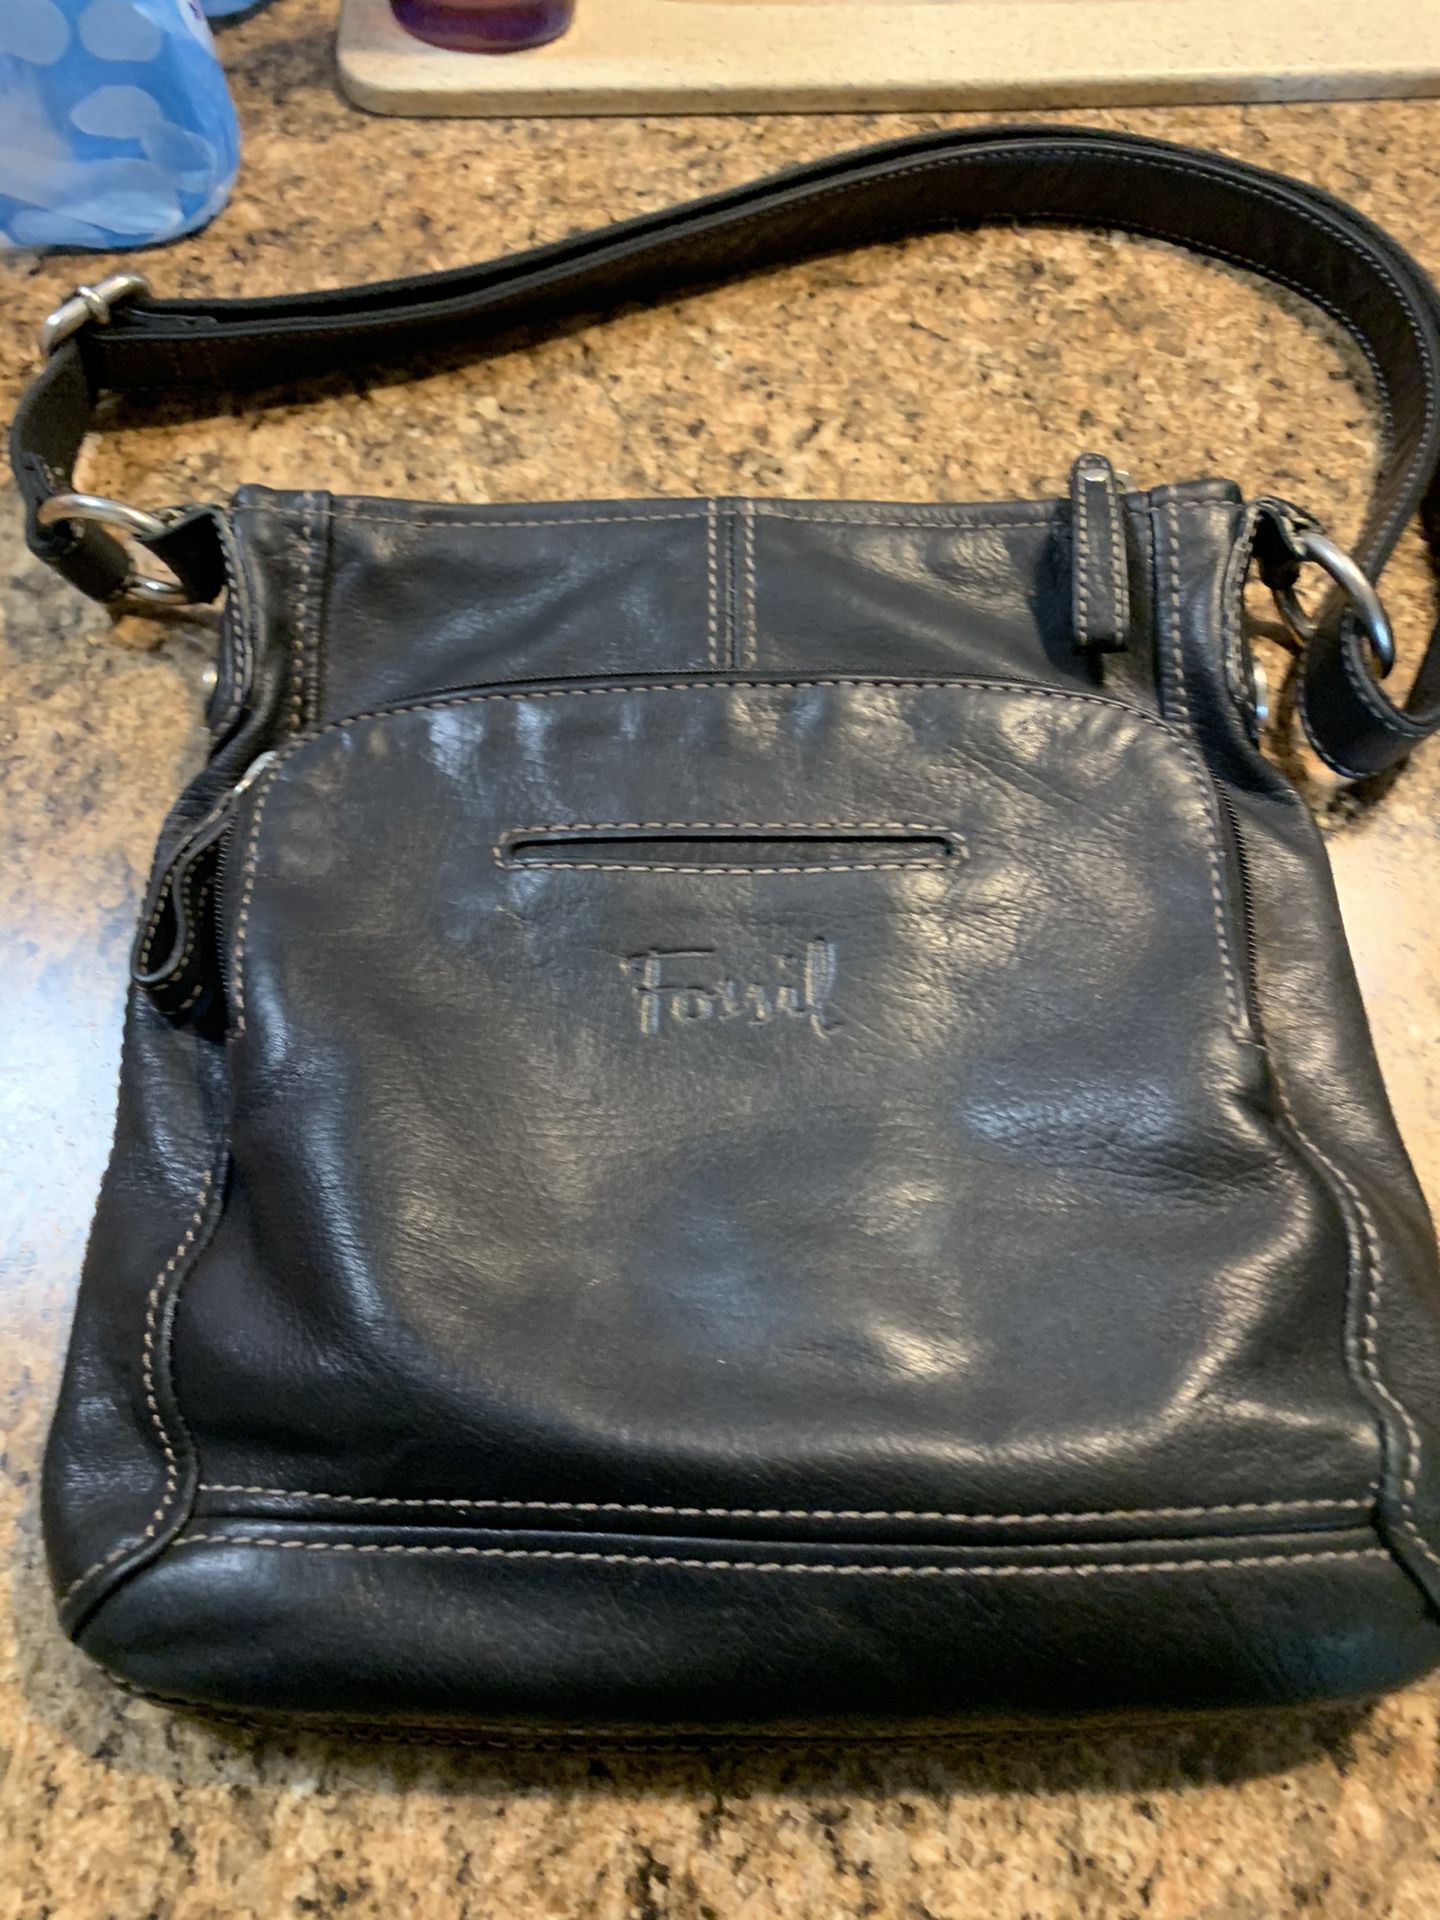 Fossil purse and wallet